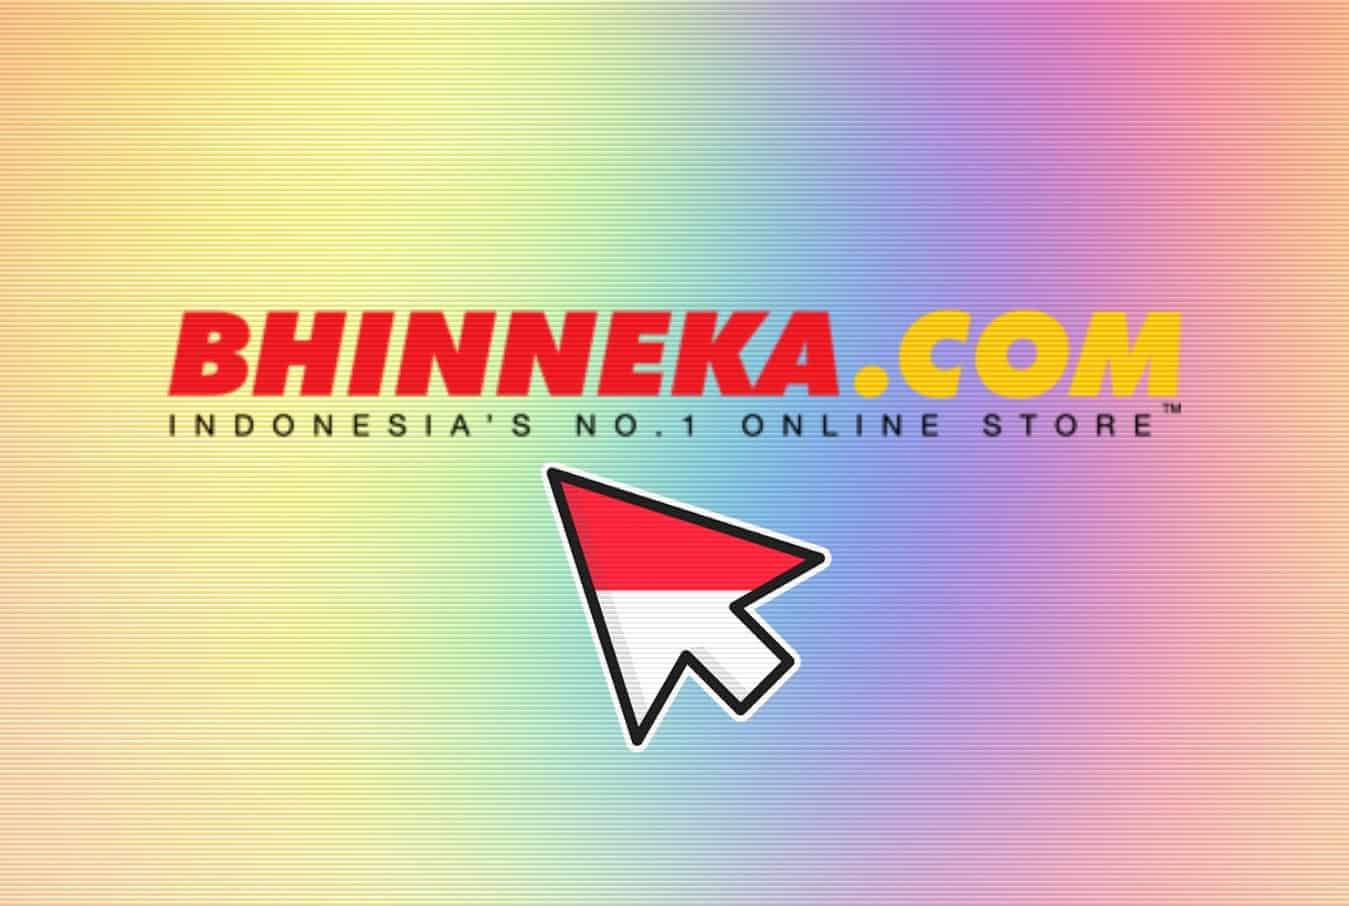 Database of Indonesian store Bhinneka dumped with 1 million+ accounts